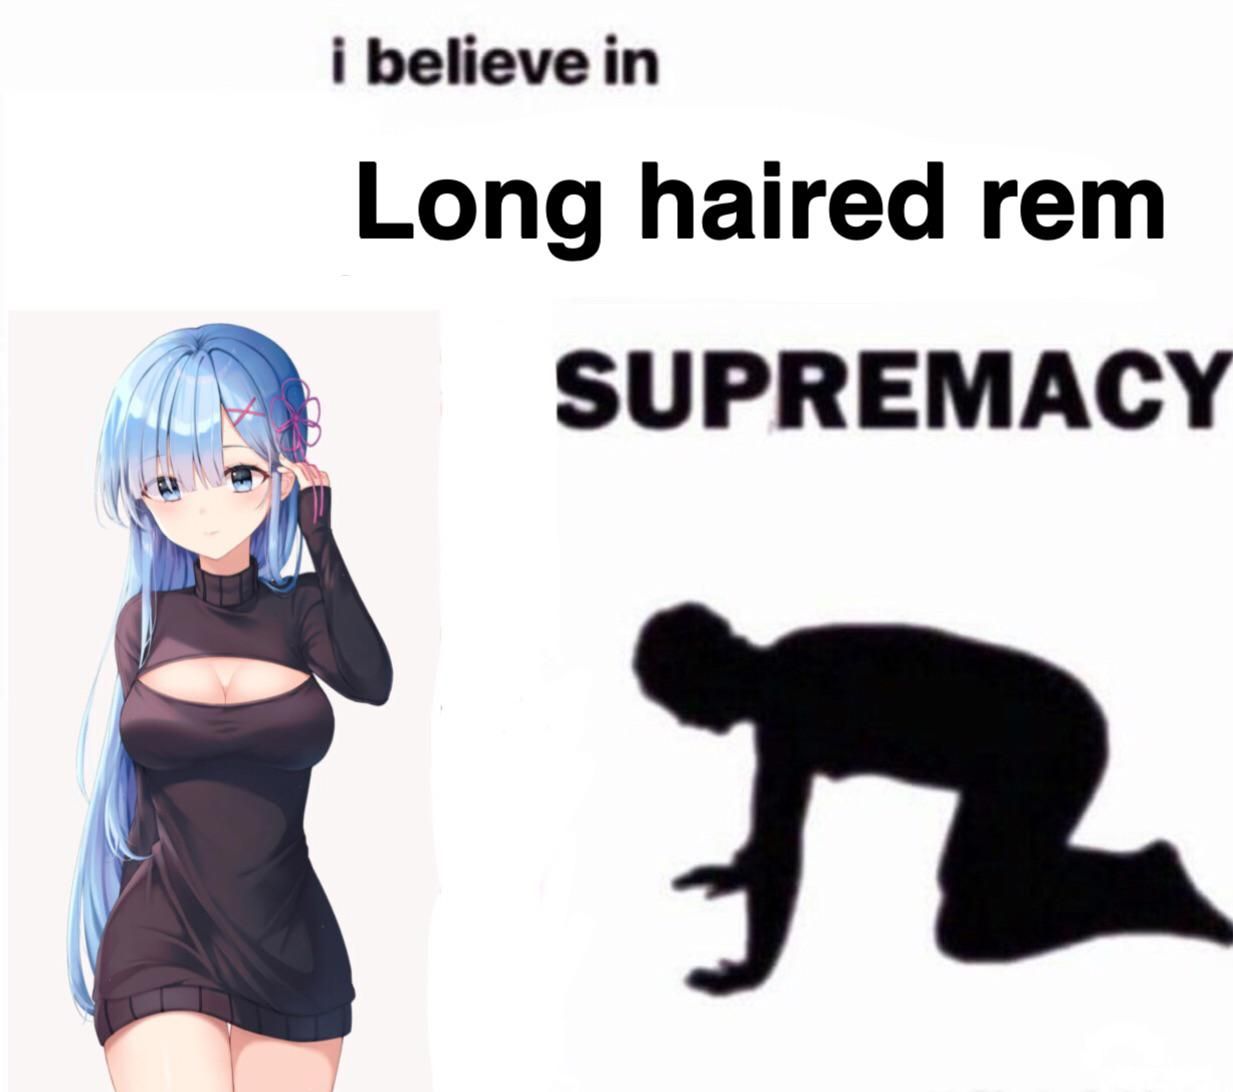 Rem with long hair